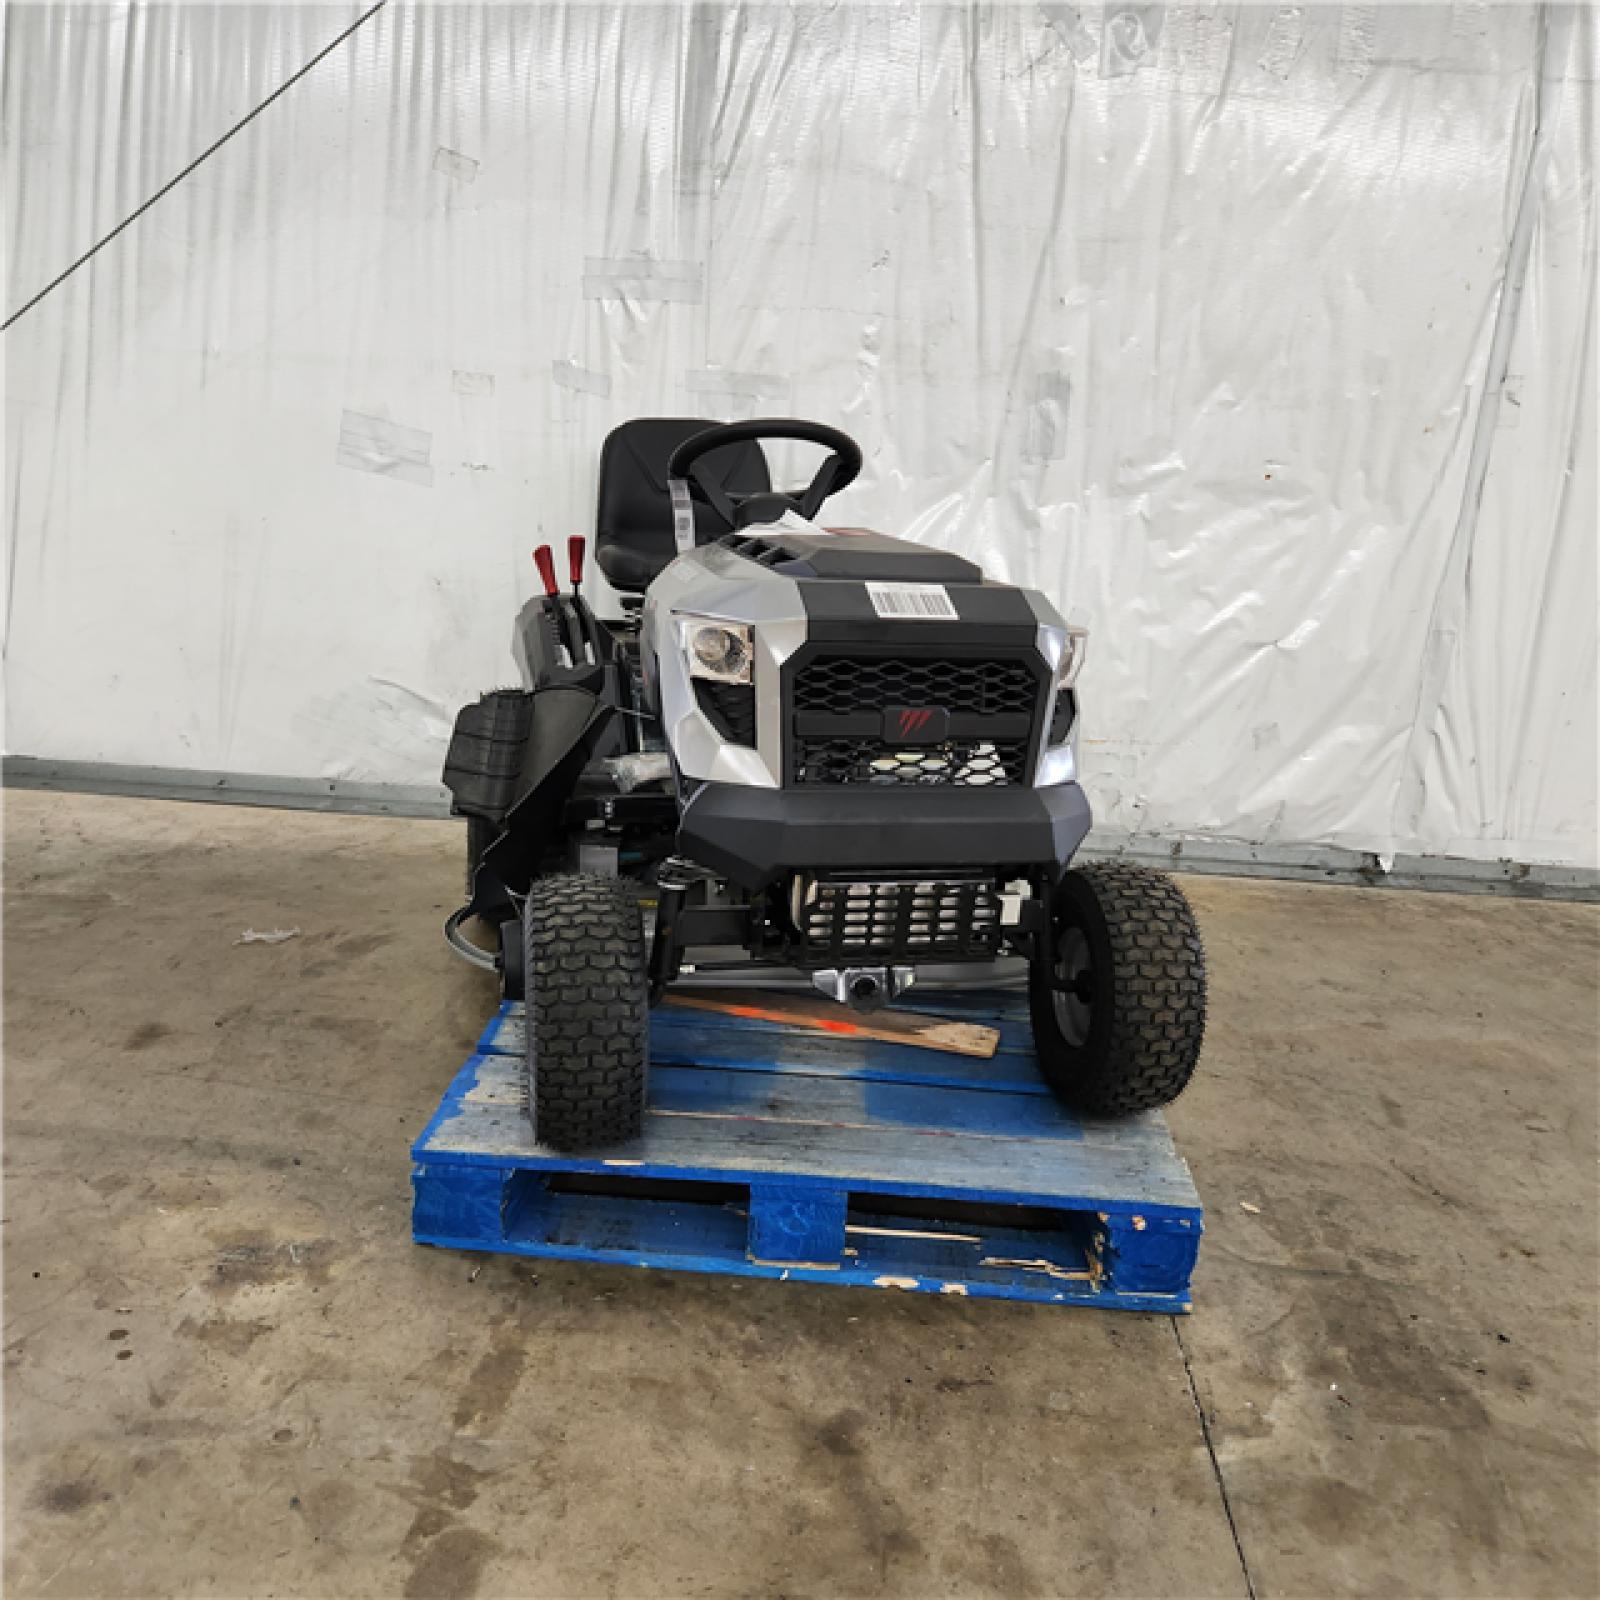 Houston Location - AS-IS Murray MT100 Riding Mower